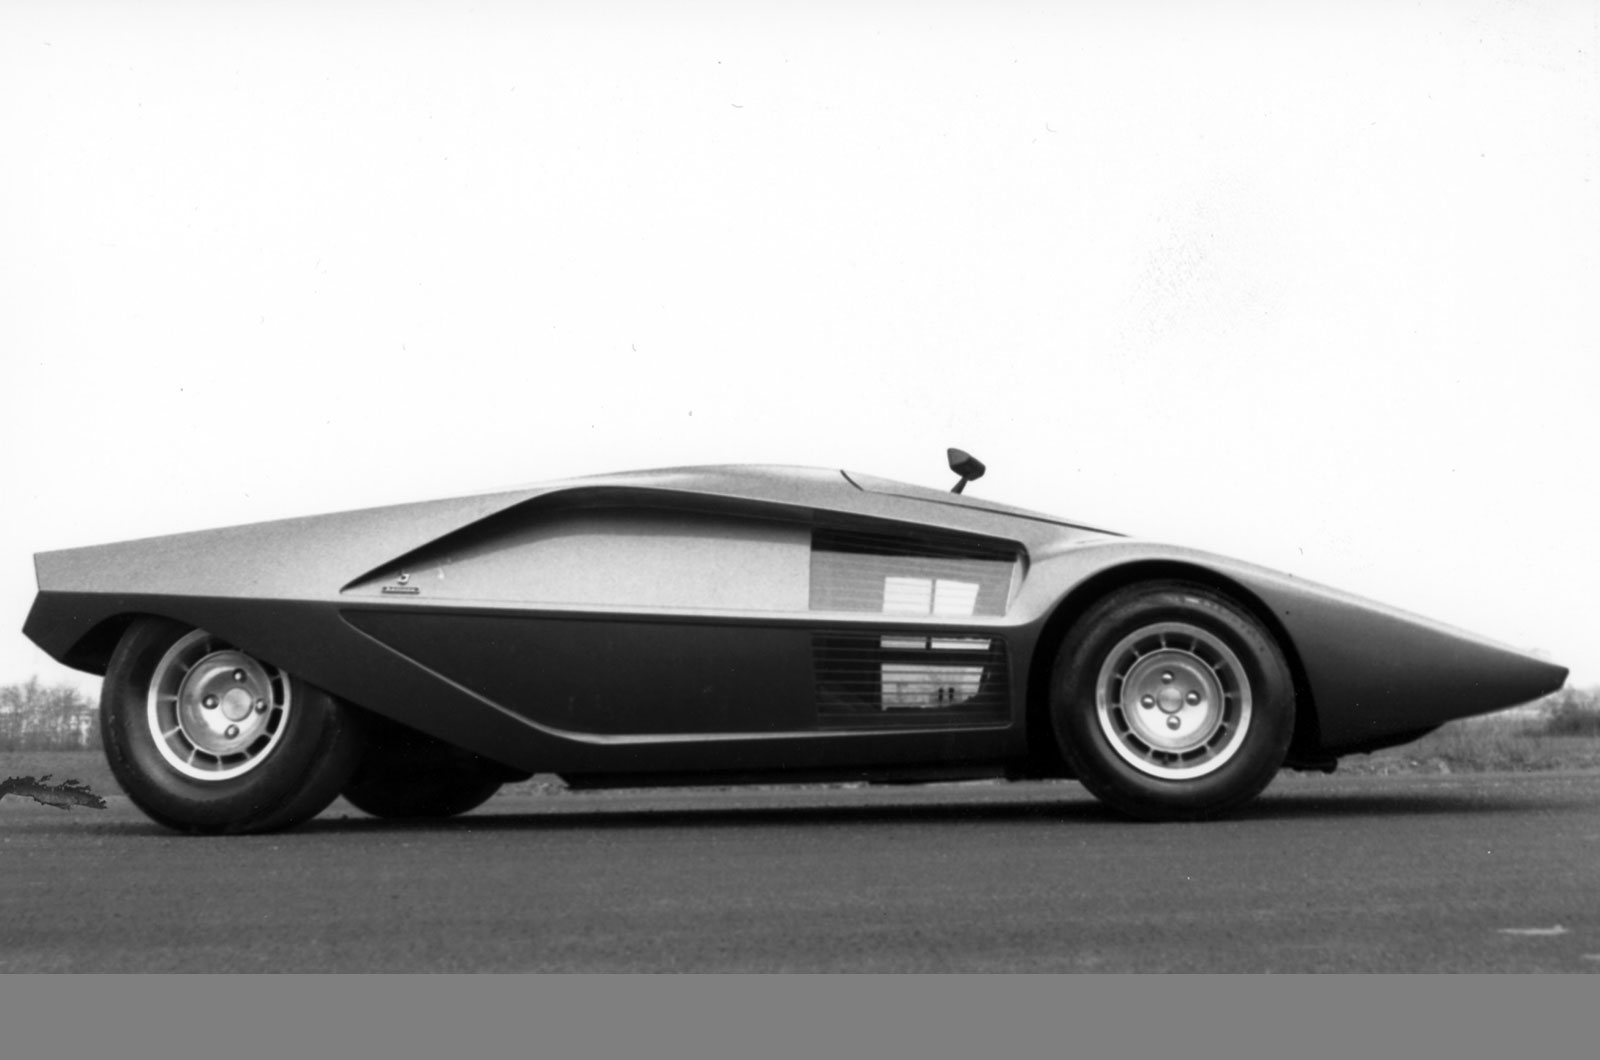 <p>The seventies was the decade of The Wedge and this was one of the wedgiest concepts ever dreamed up. It was also one of the lowest at just 83cm. Another <strong>Marcello Gandini </strong>(born 1938) confection, the Stratos Zero featured a 115 BHP 1.6-liter V4 from the Lancia Fulvia. Talk about all mouth and no trousers.</p>